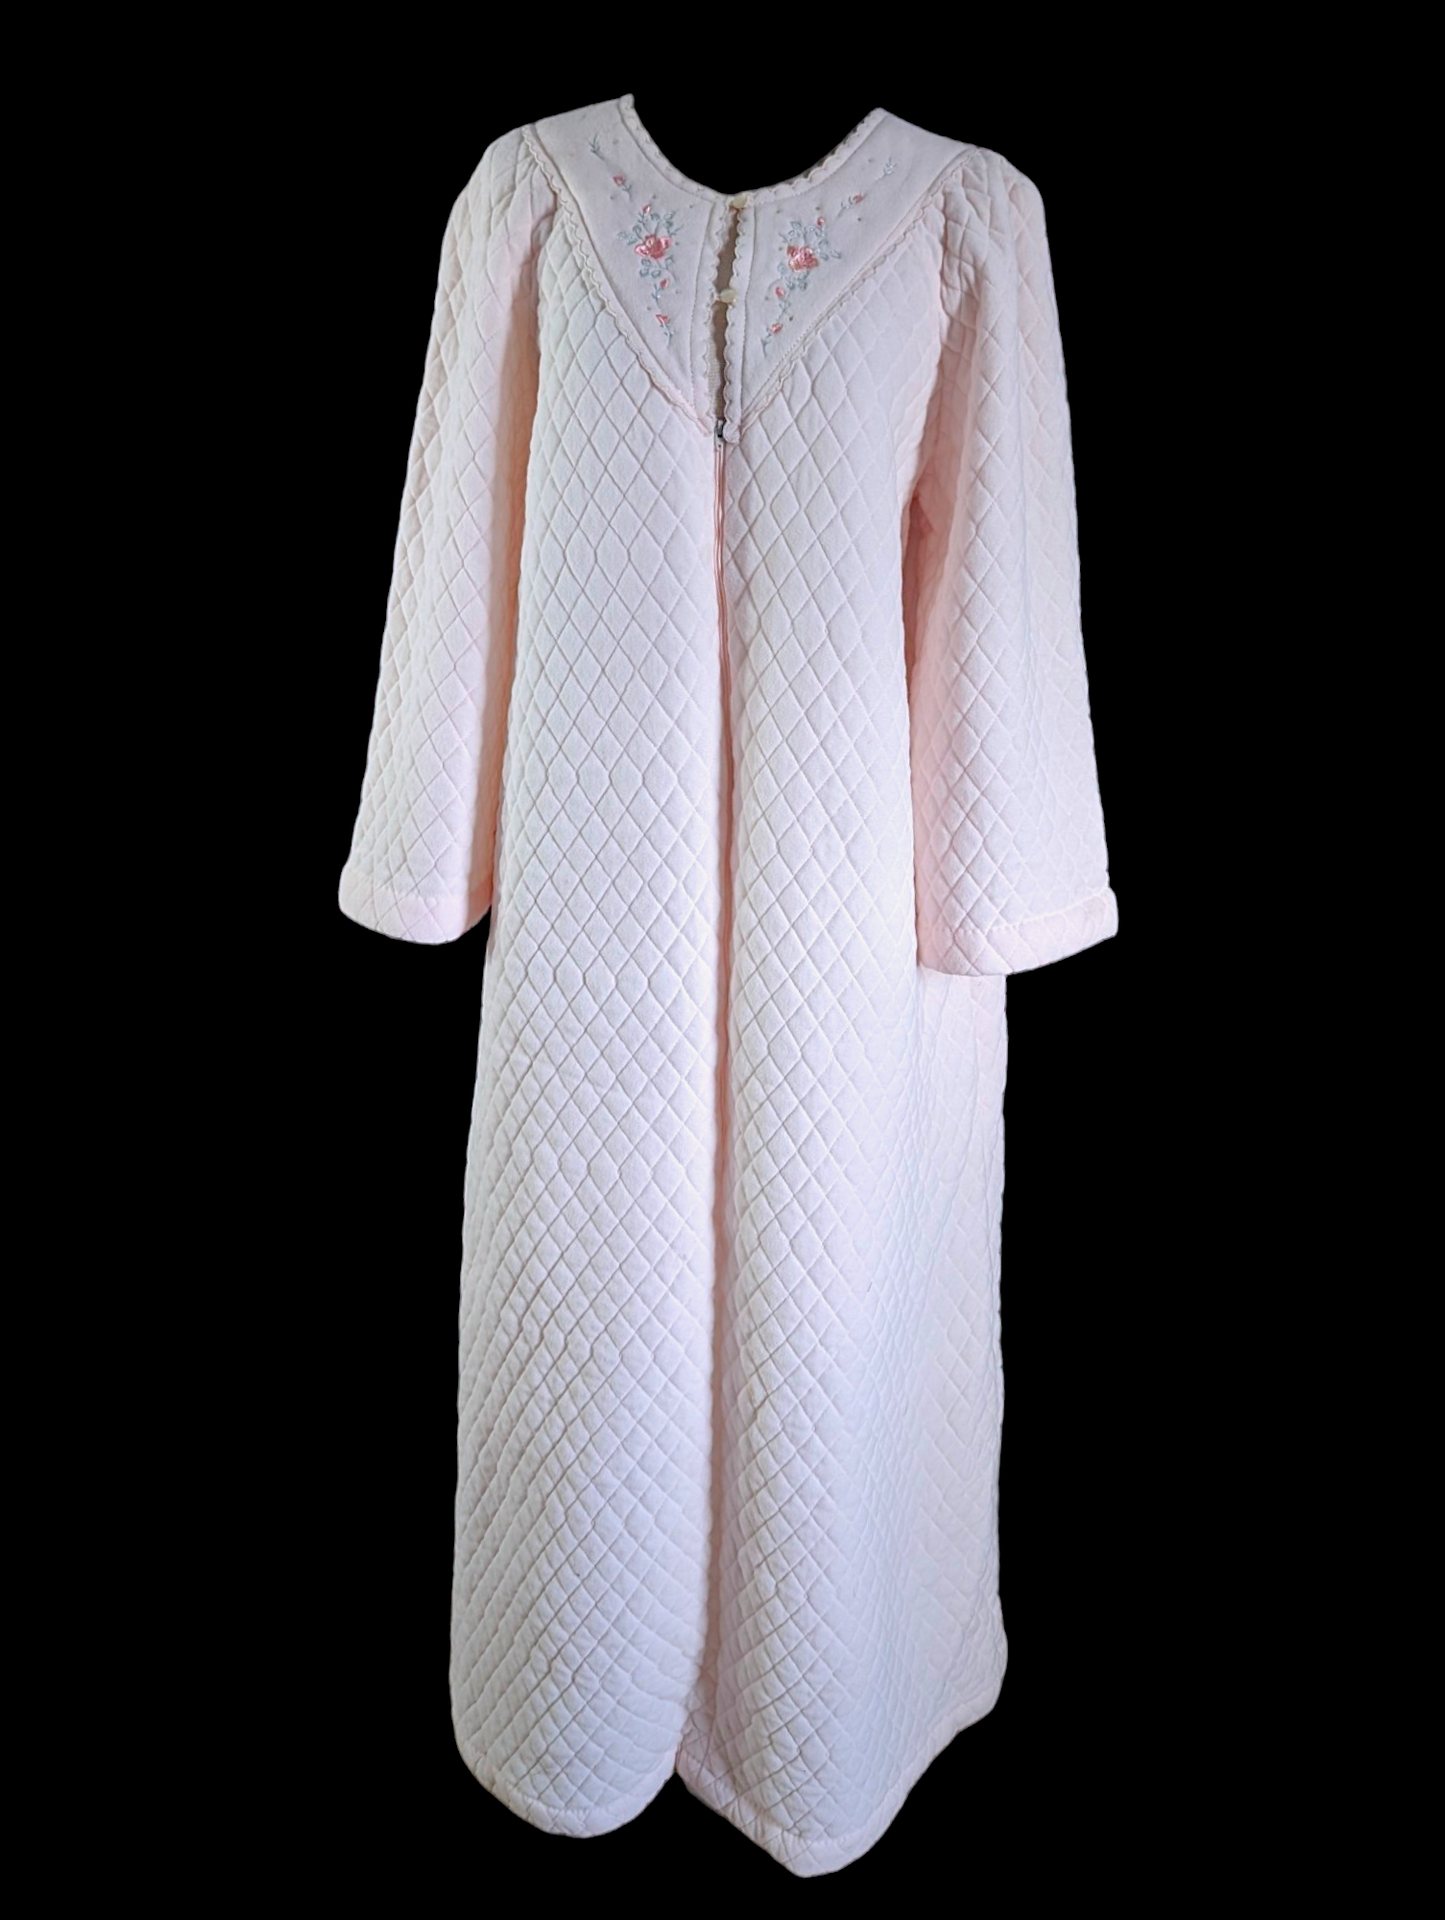 1980s Plush Quilted Pink Floor Length Nightgown with Embroidered Flowers, Long Sleeves, and Talon Zipper